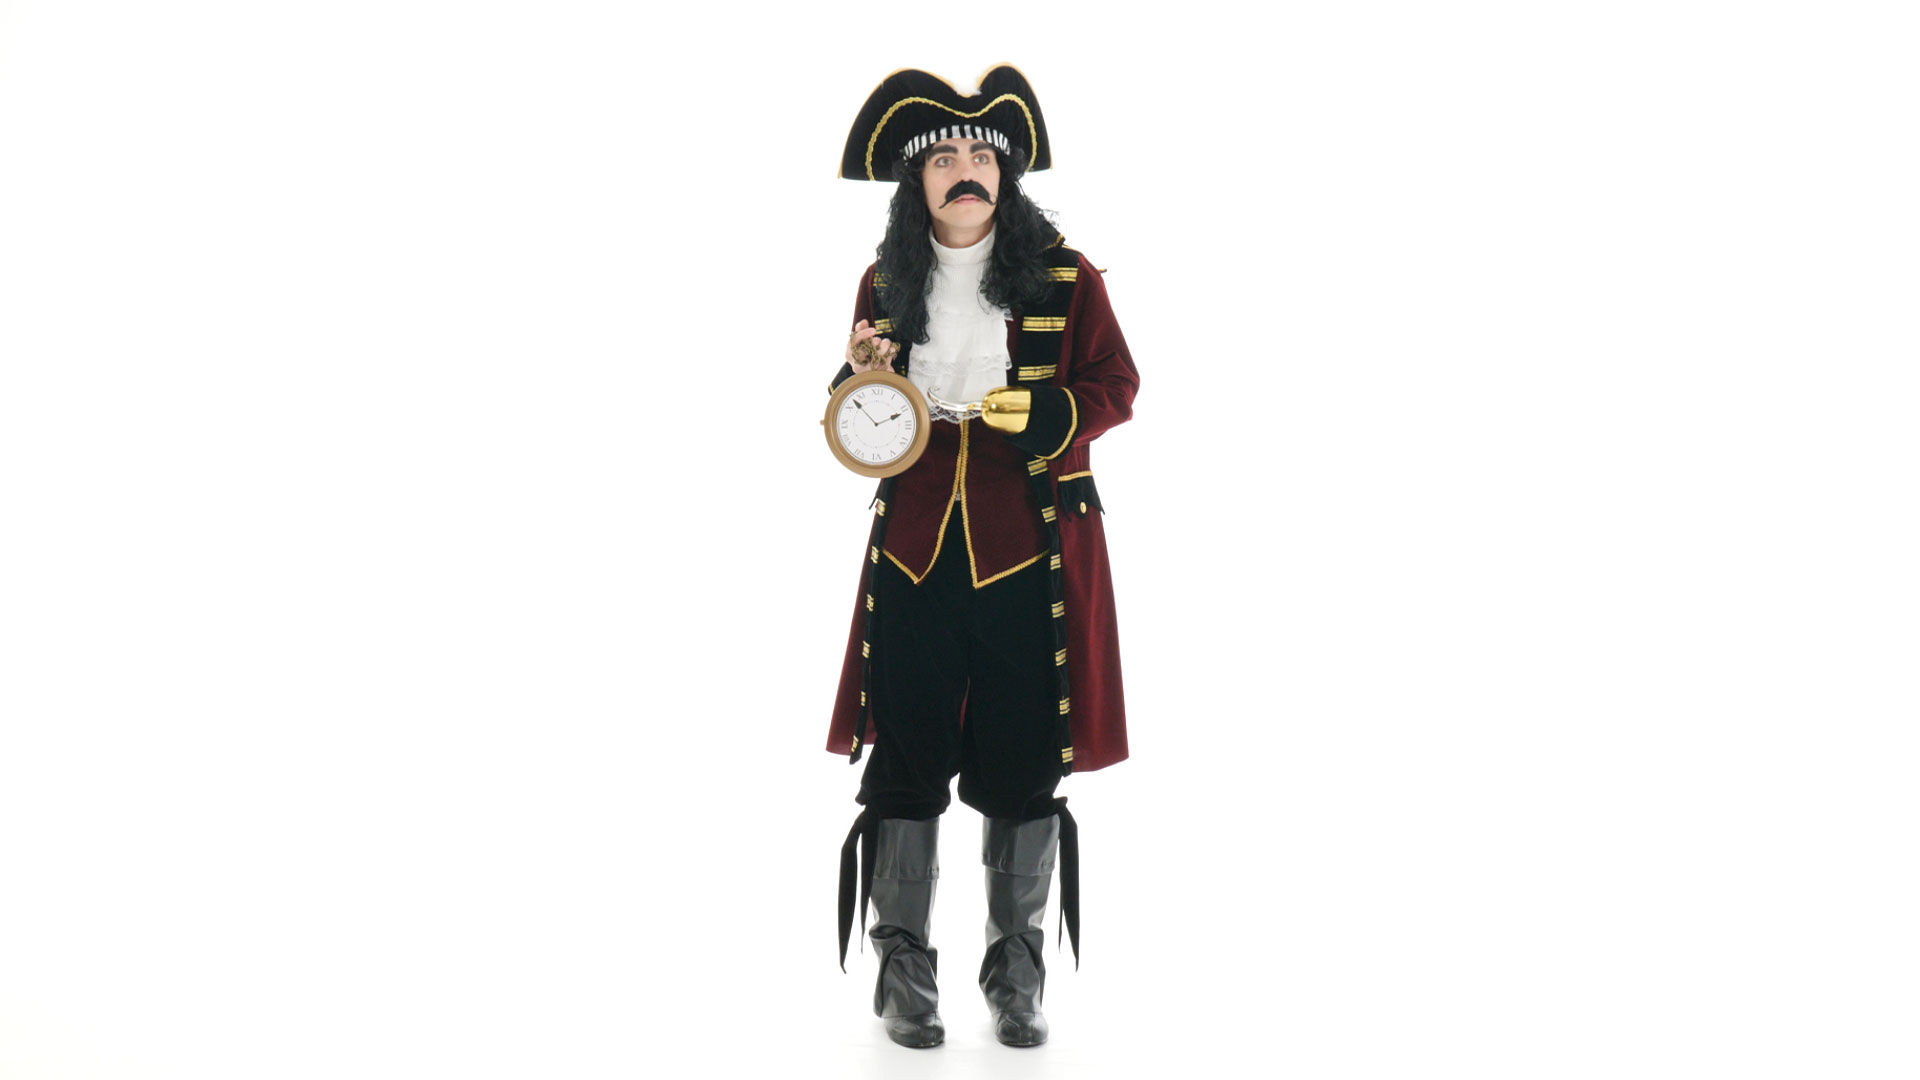 This Captain Hook Pirate Costume is great for plays or Halloween.  Be sure to get a curly mustache and wig to go along with the costume and pirate hat.  Peter Pan will have his work cut out for him.